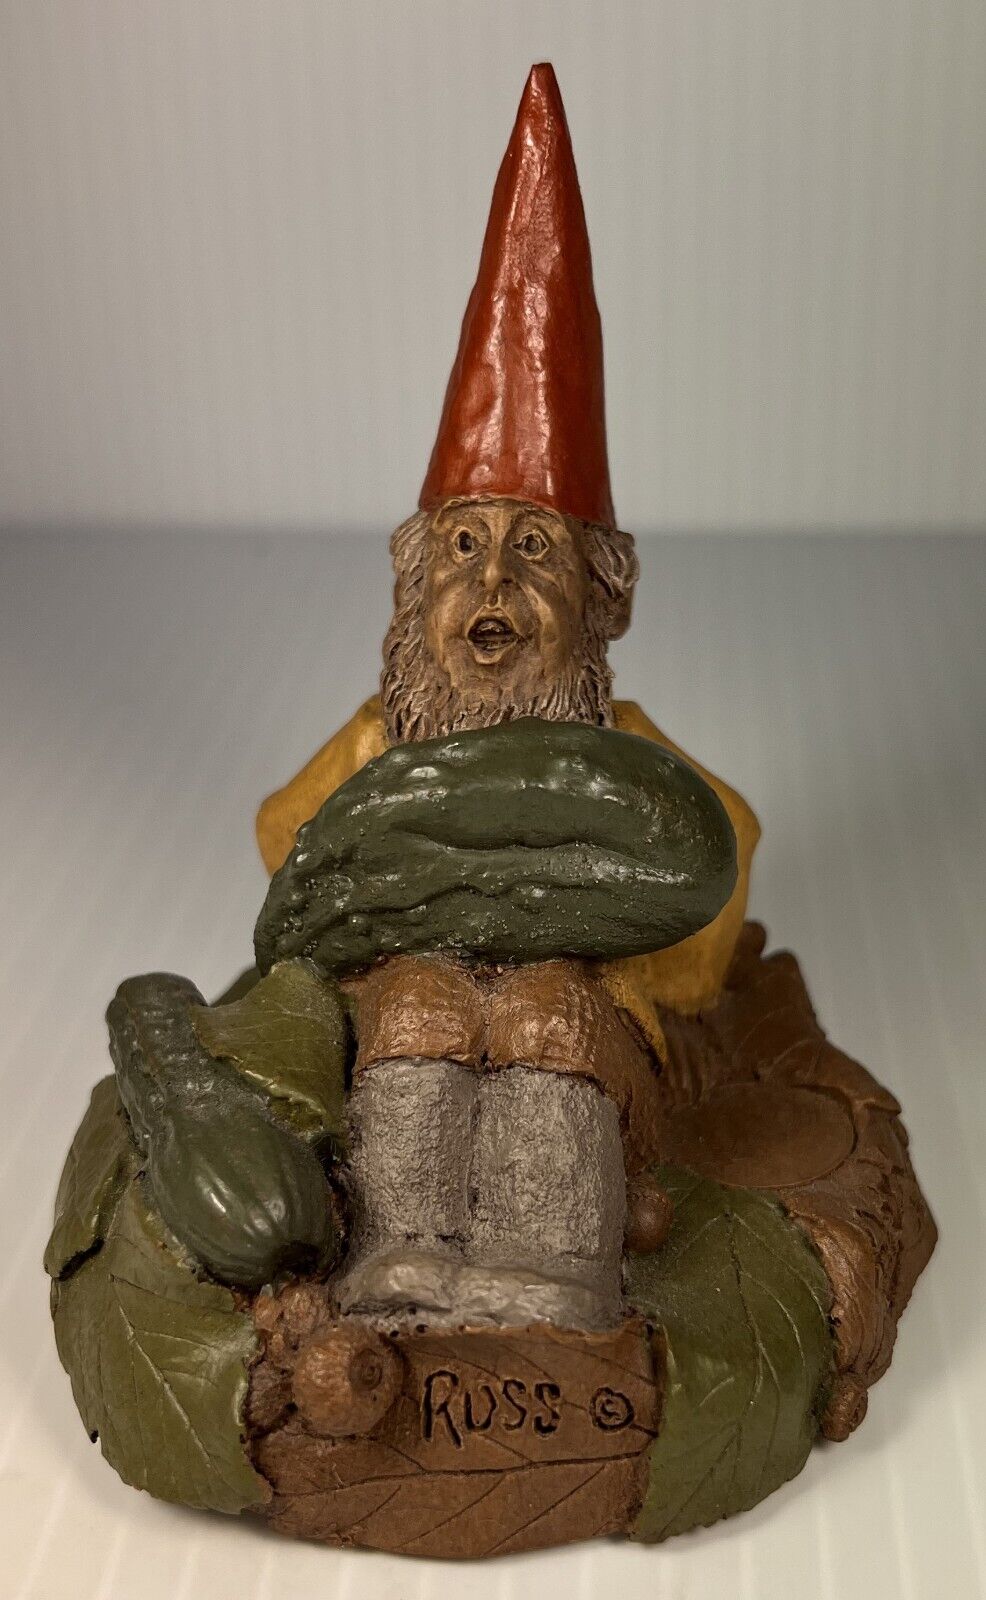 RUSS-R 1991~Tom Clark Gnome~Cairn Item #5158~Edition #36~Story Card Included